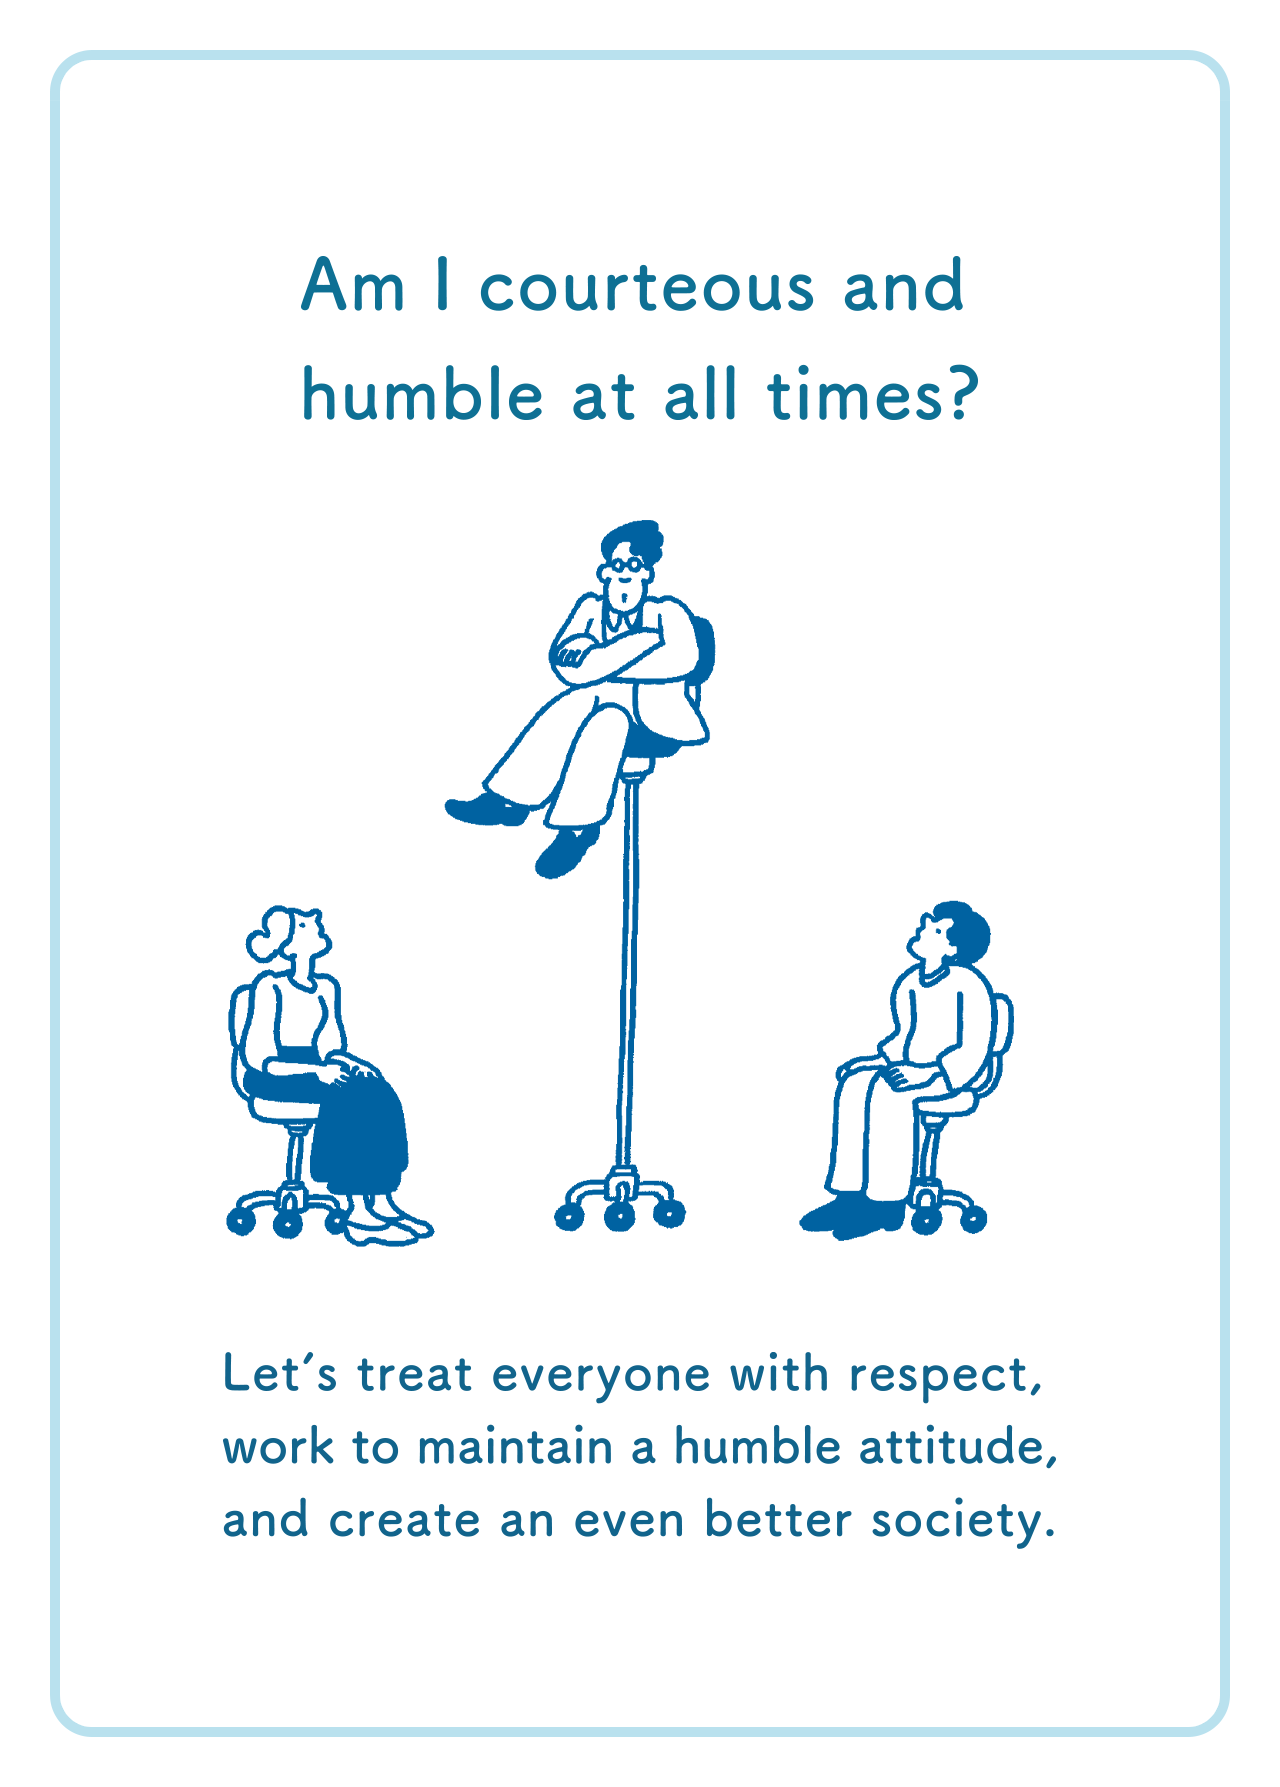 The Importance of Attitude in Our Work Am I courteous and humble at all times? Letʼs treat everyone with respect, work to maintain a humble attitude, and create an even better society.